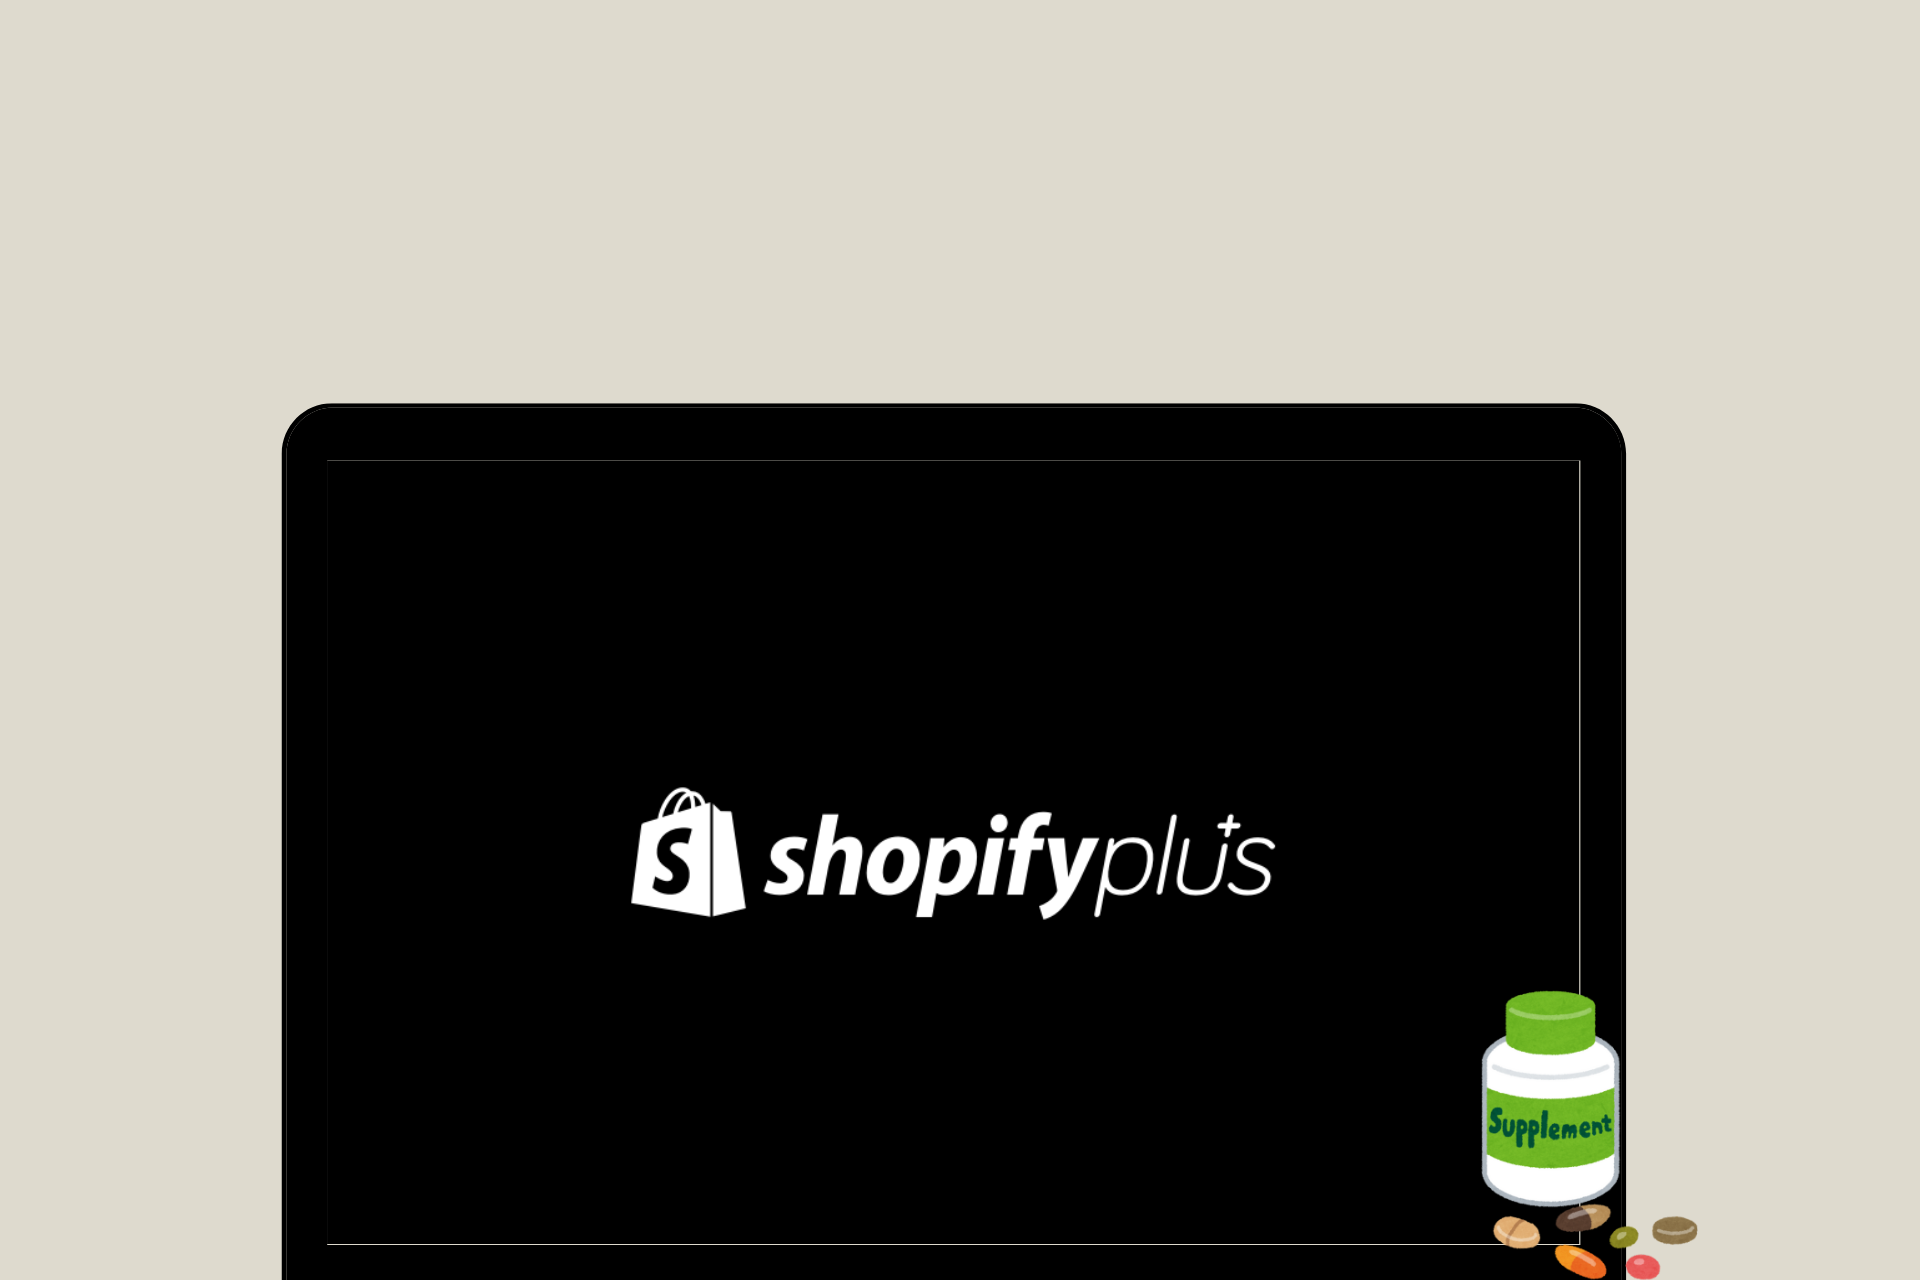 Top Vitamin And Supplement Brands On Shopify Plus